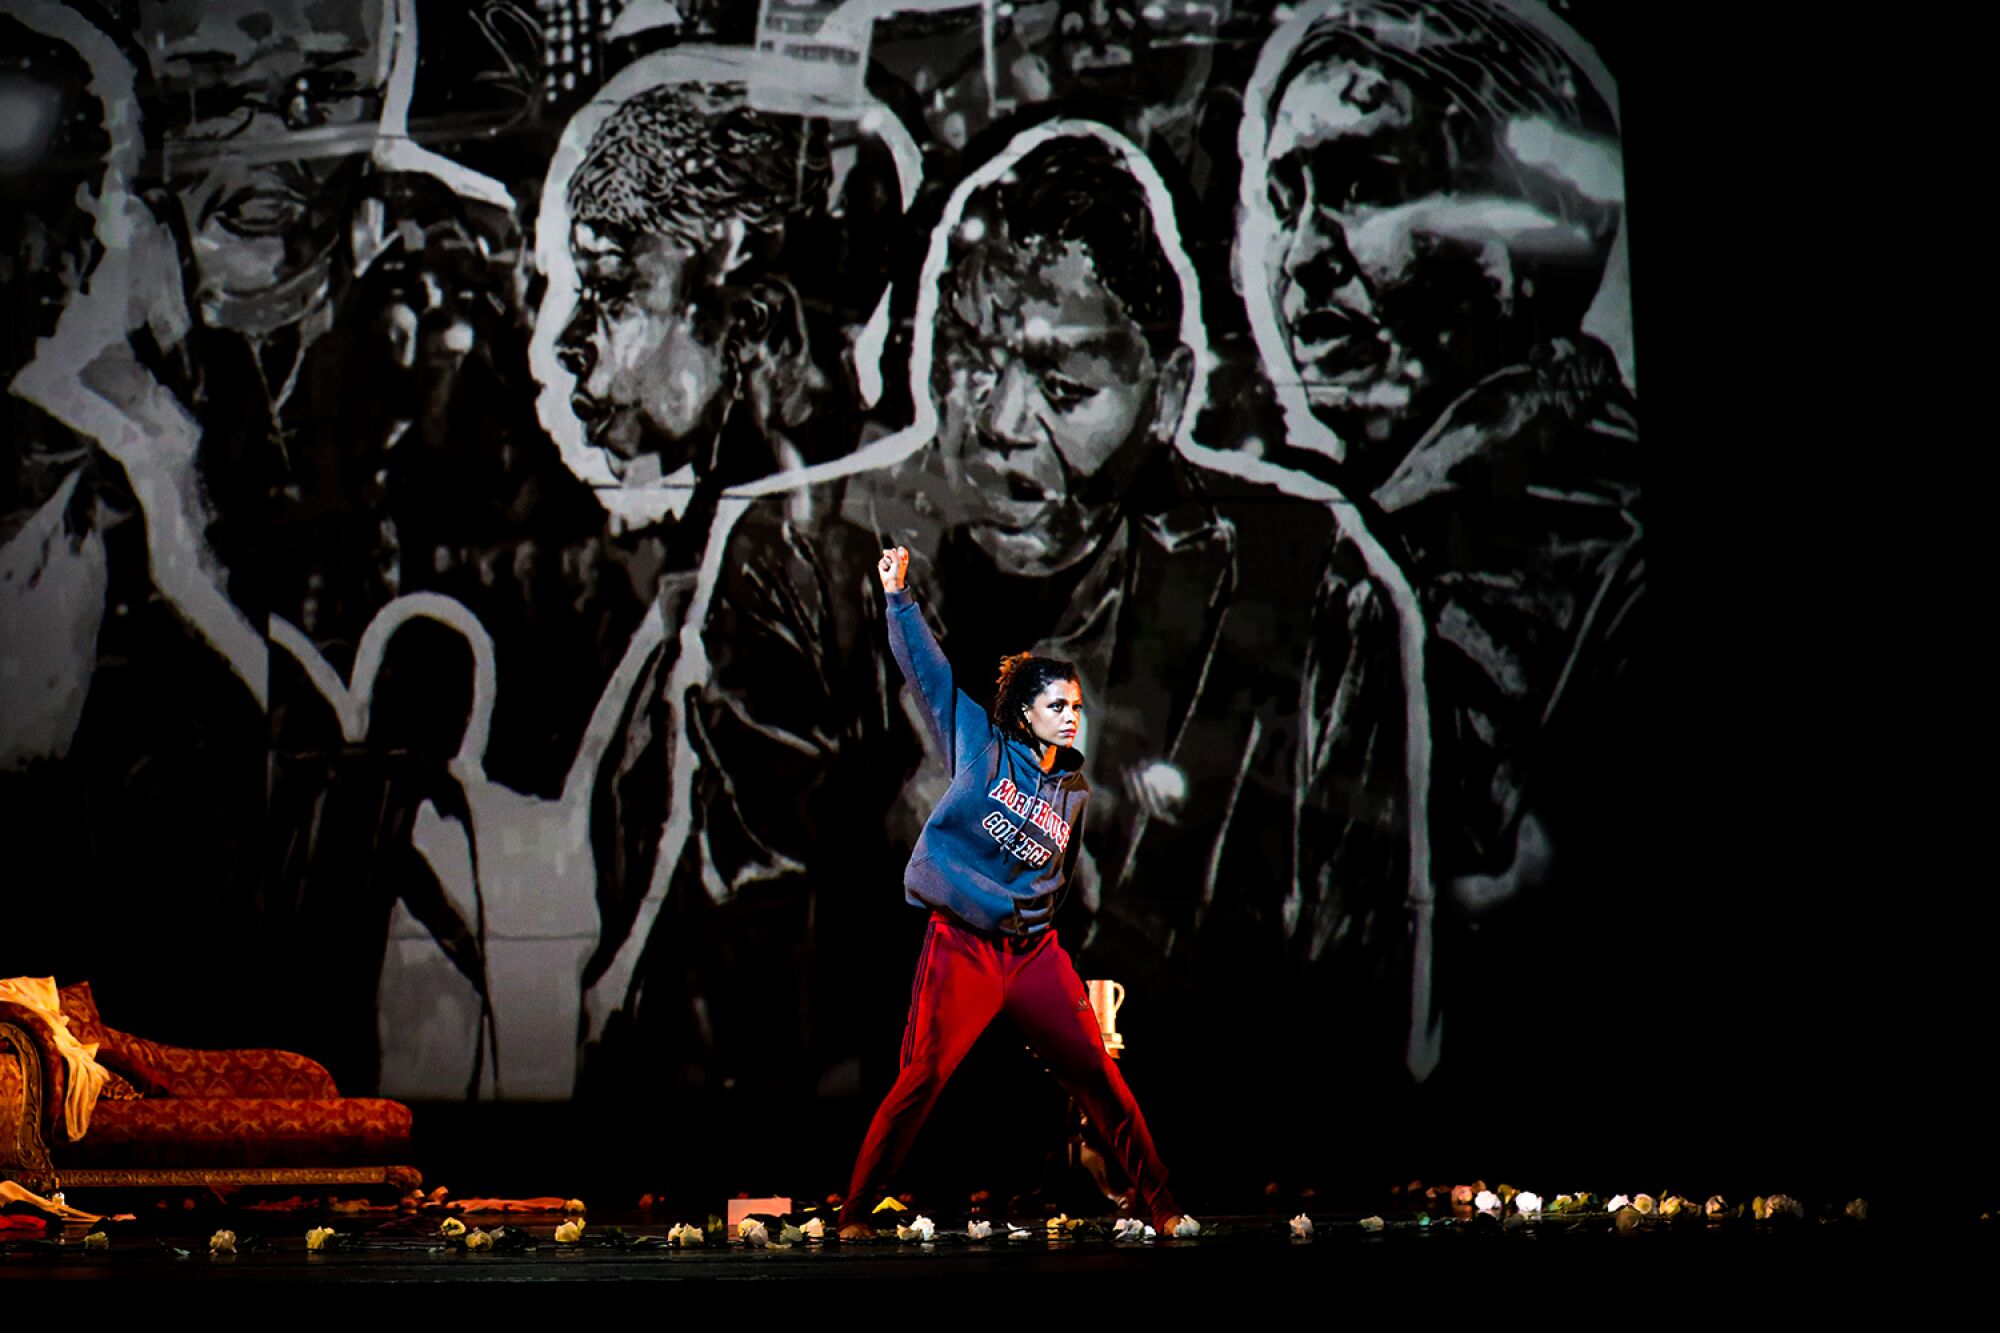 Dancer Fana Tesfagiorgis in “A Mother’s Rite,” with portraits in the background by visual artist Sophia Dawson.